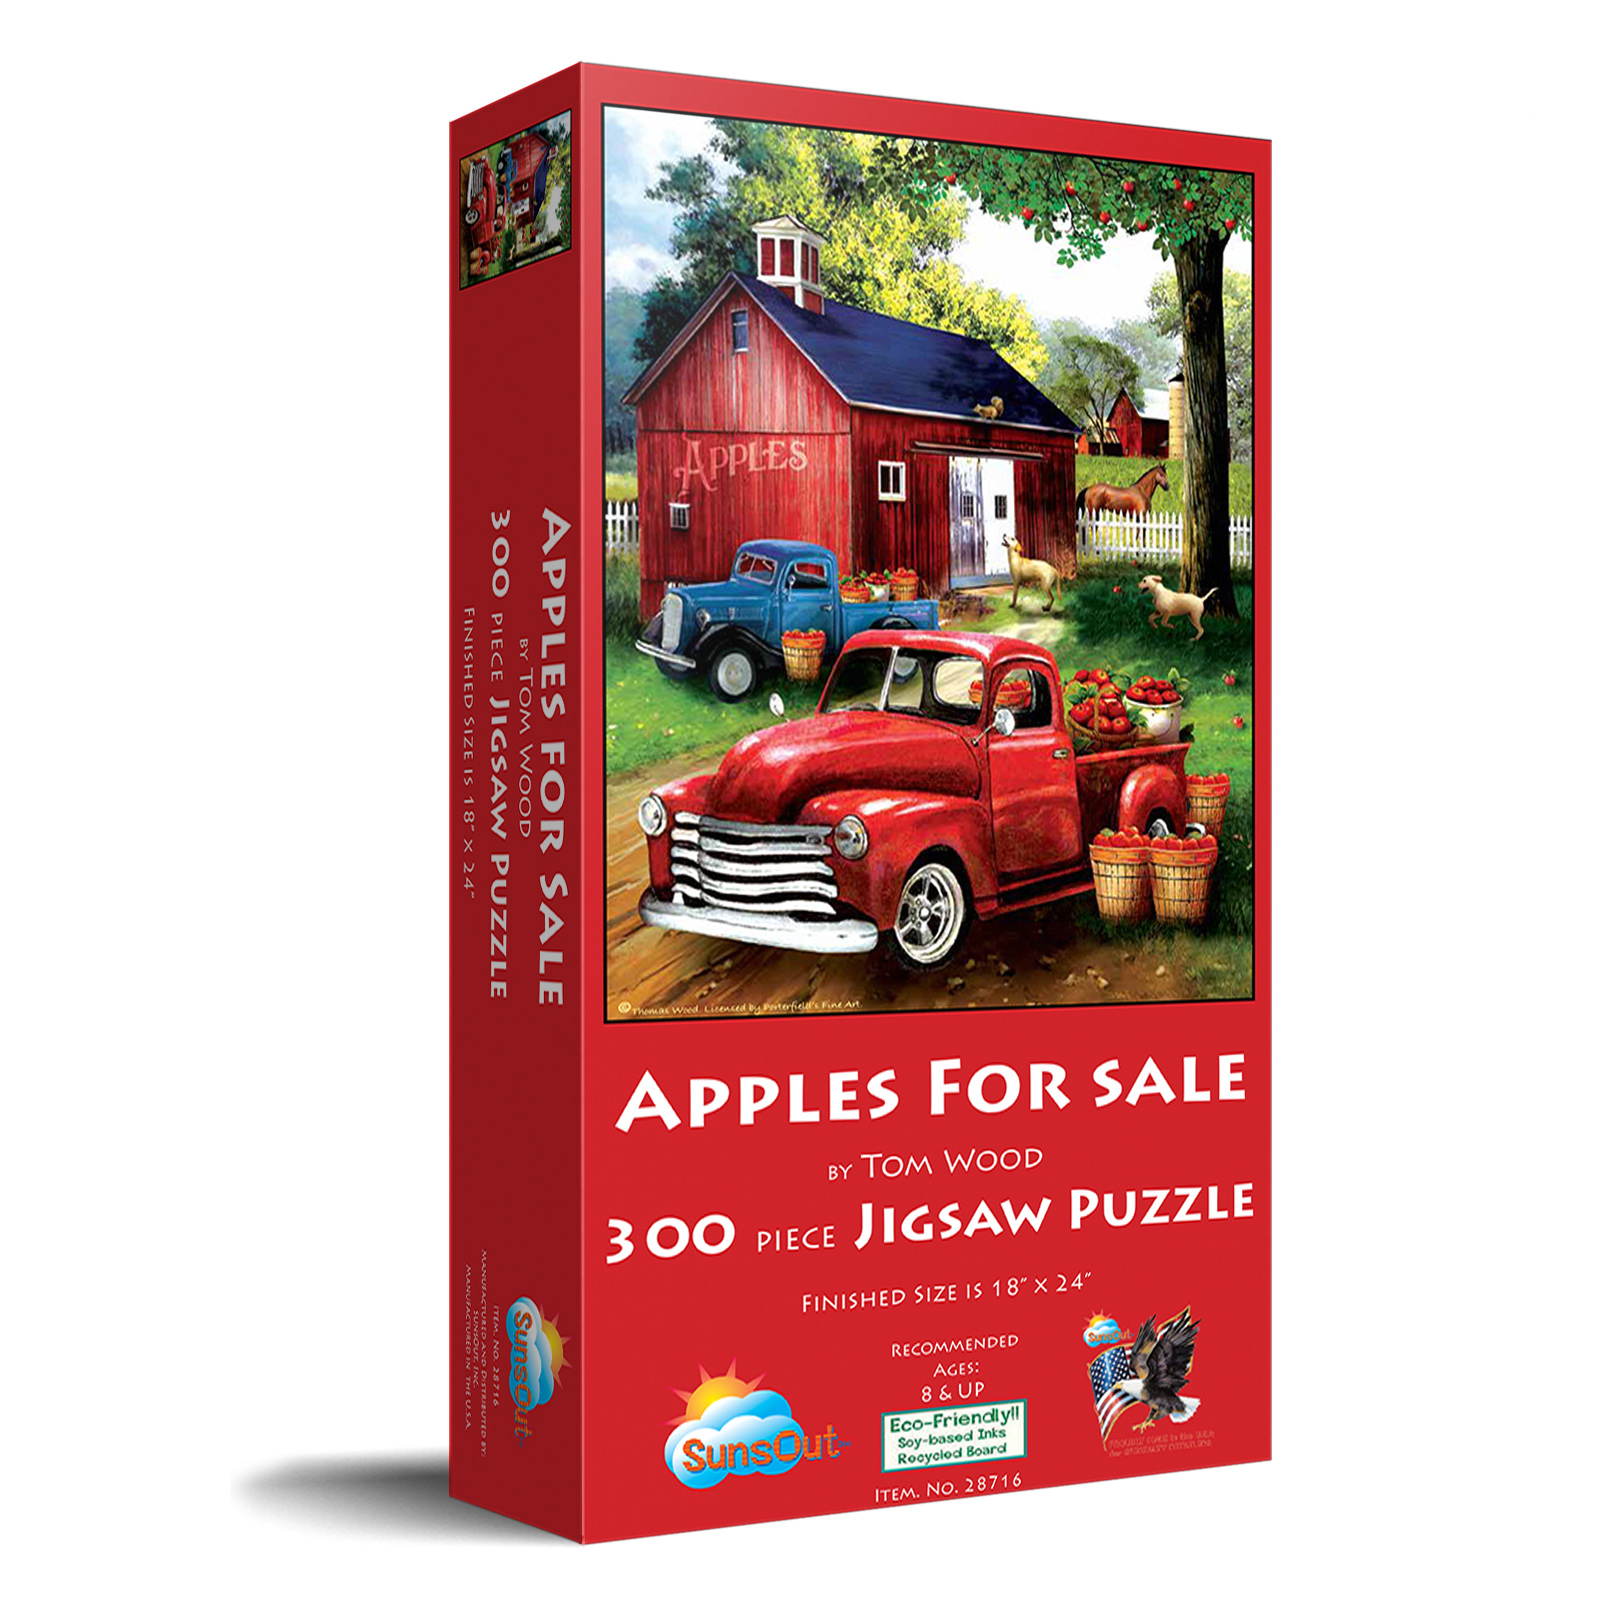 Apples for Sale 300 Piece Jigsaw Puzzle by SunsOut - image 2 of 5